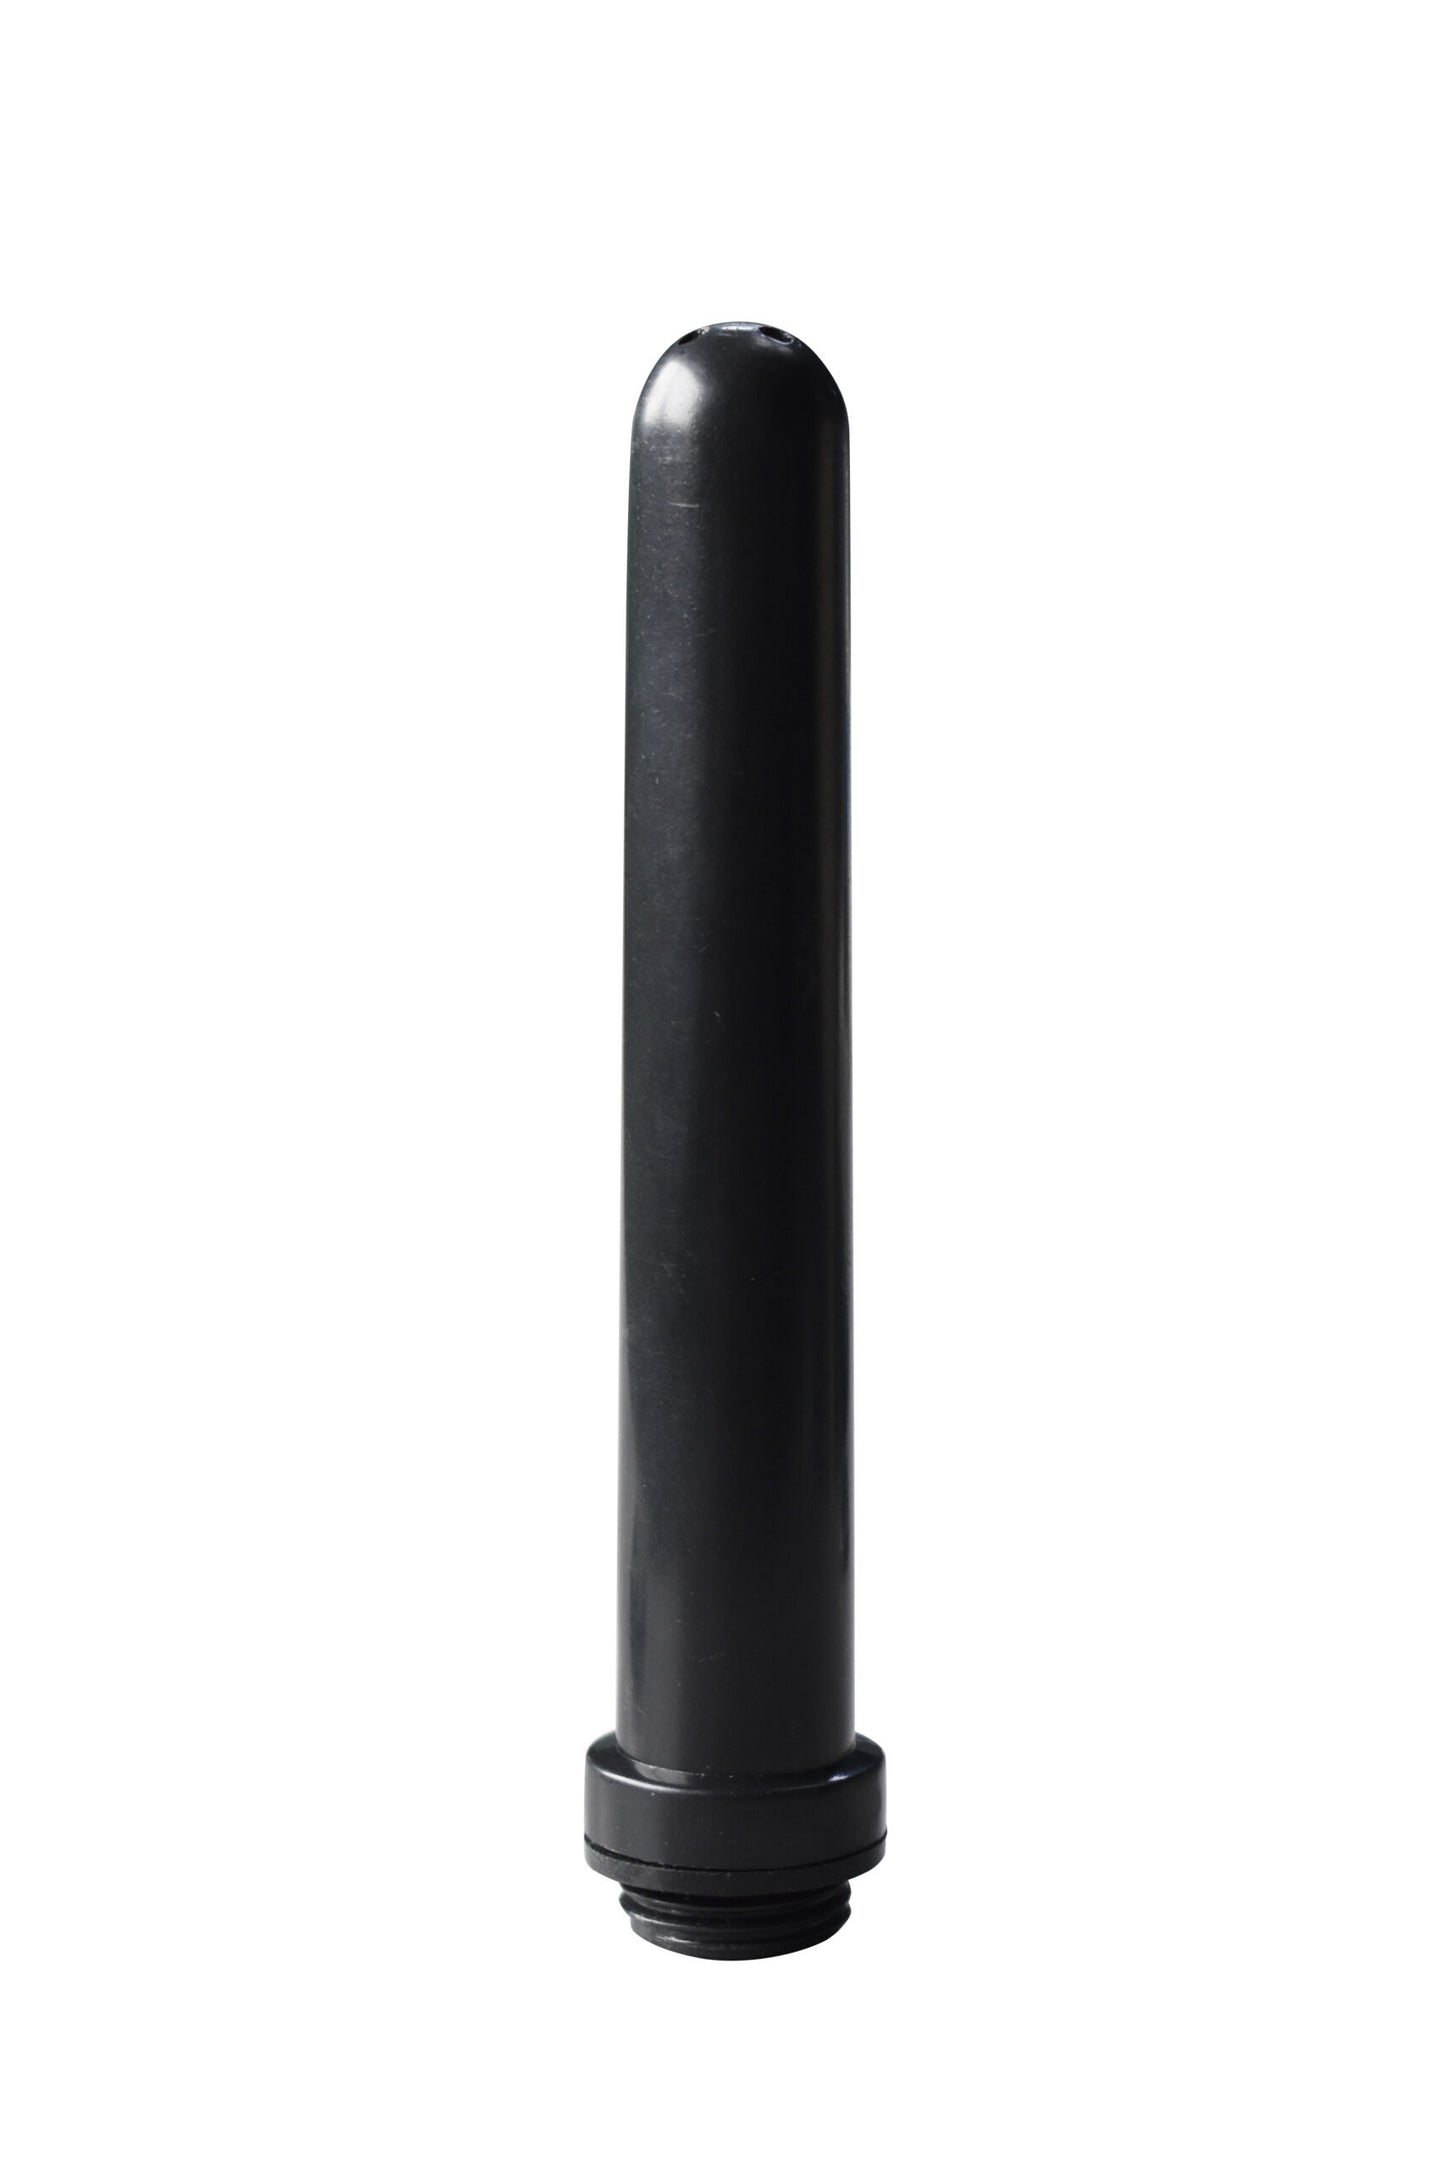 Power Escorts - BR277 - Anal Tube Cleaner - Tube Pro - Anal Douche Cleaner - Black - 15 cm / 5.9 Inch